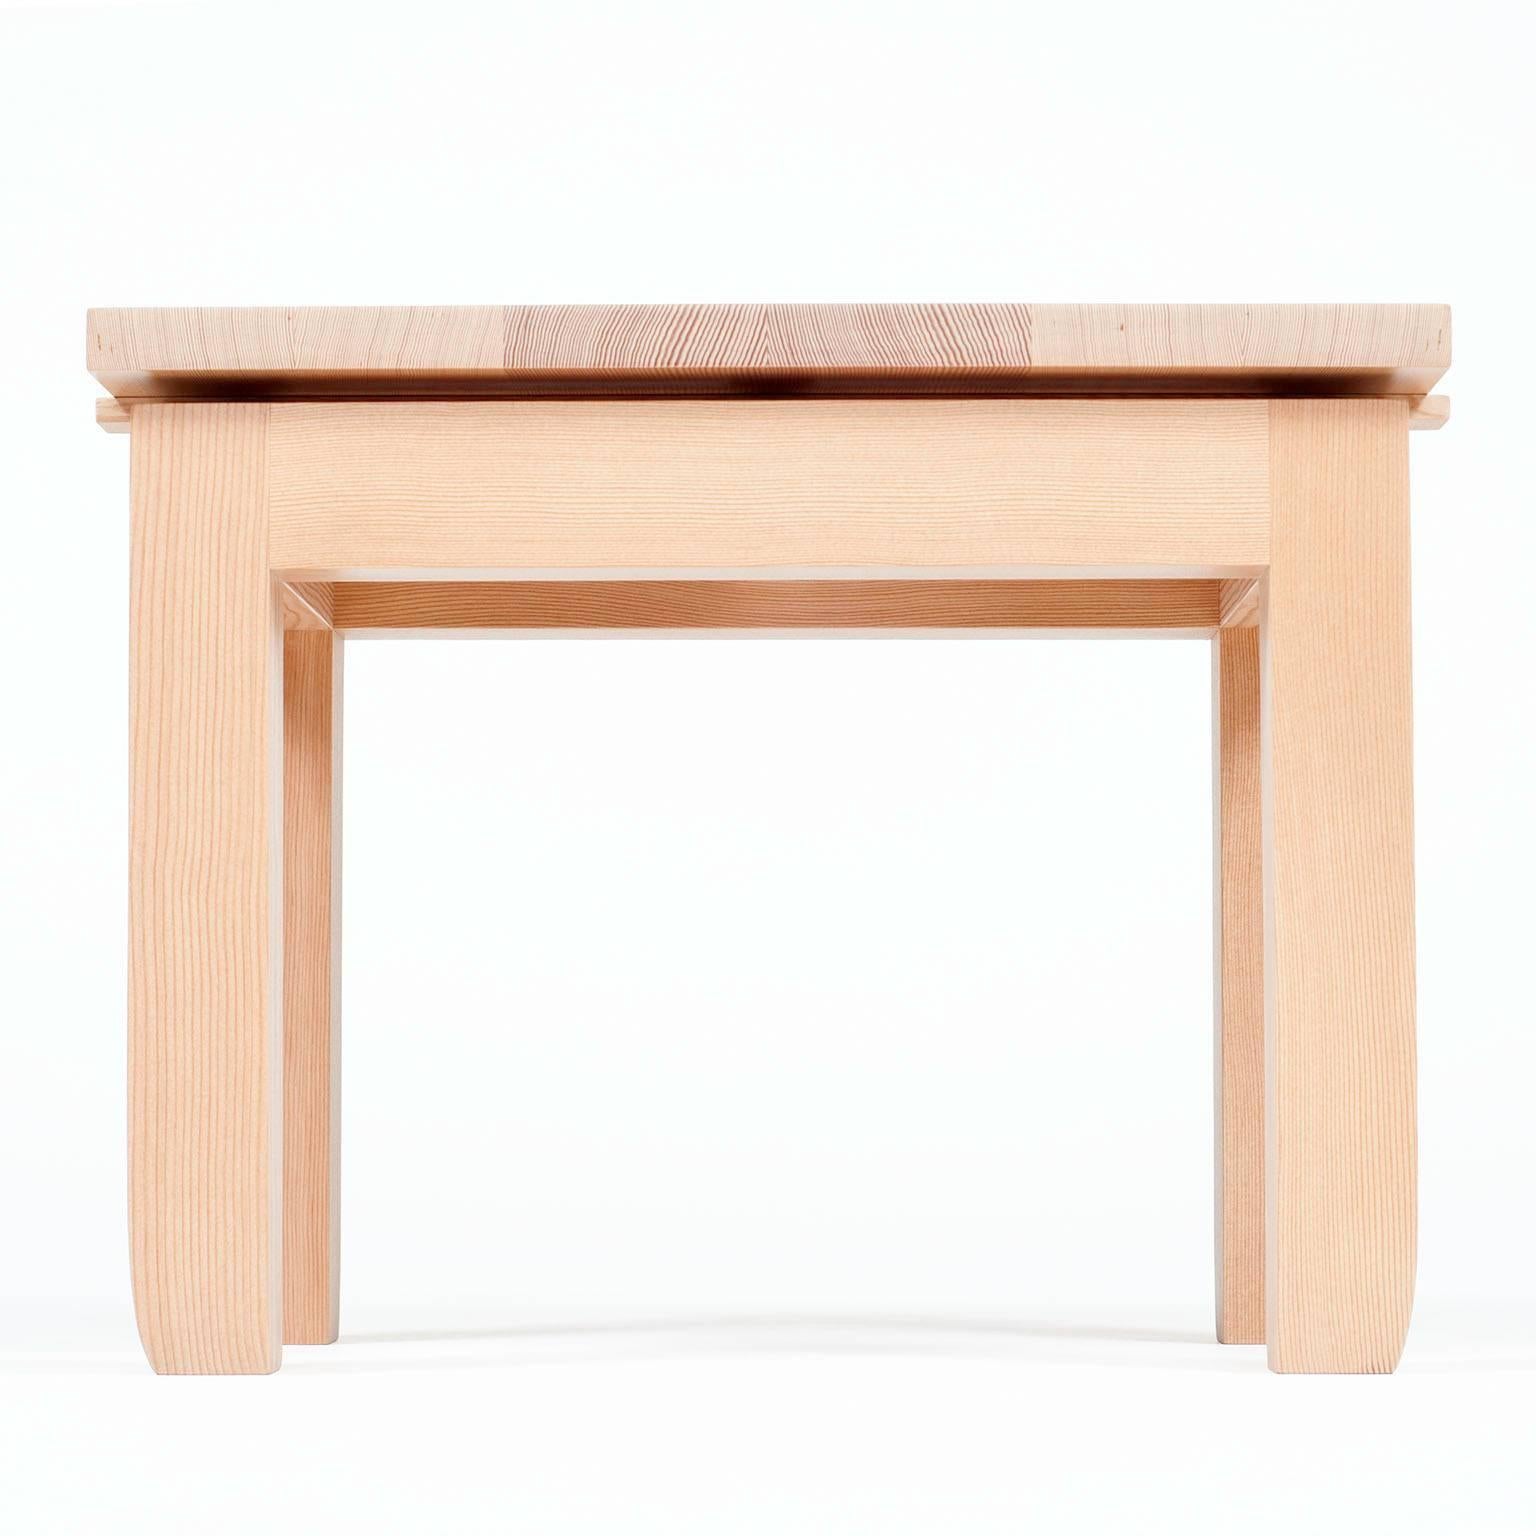 Prayer stool 012
clear Douglas Fir
Measures: 12 x 18 x 14 high
Water-based outdoor safe conversion varnish finish,
2017.

As always-one step up towards reaching your inner goals or your upper shelves. The perfect front hall shoe bench, plant